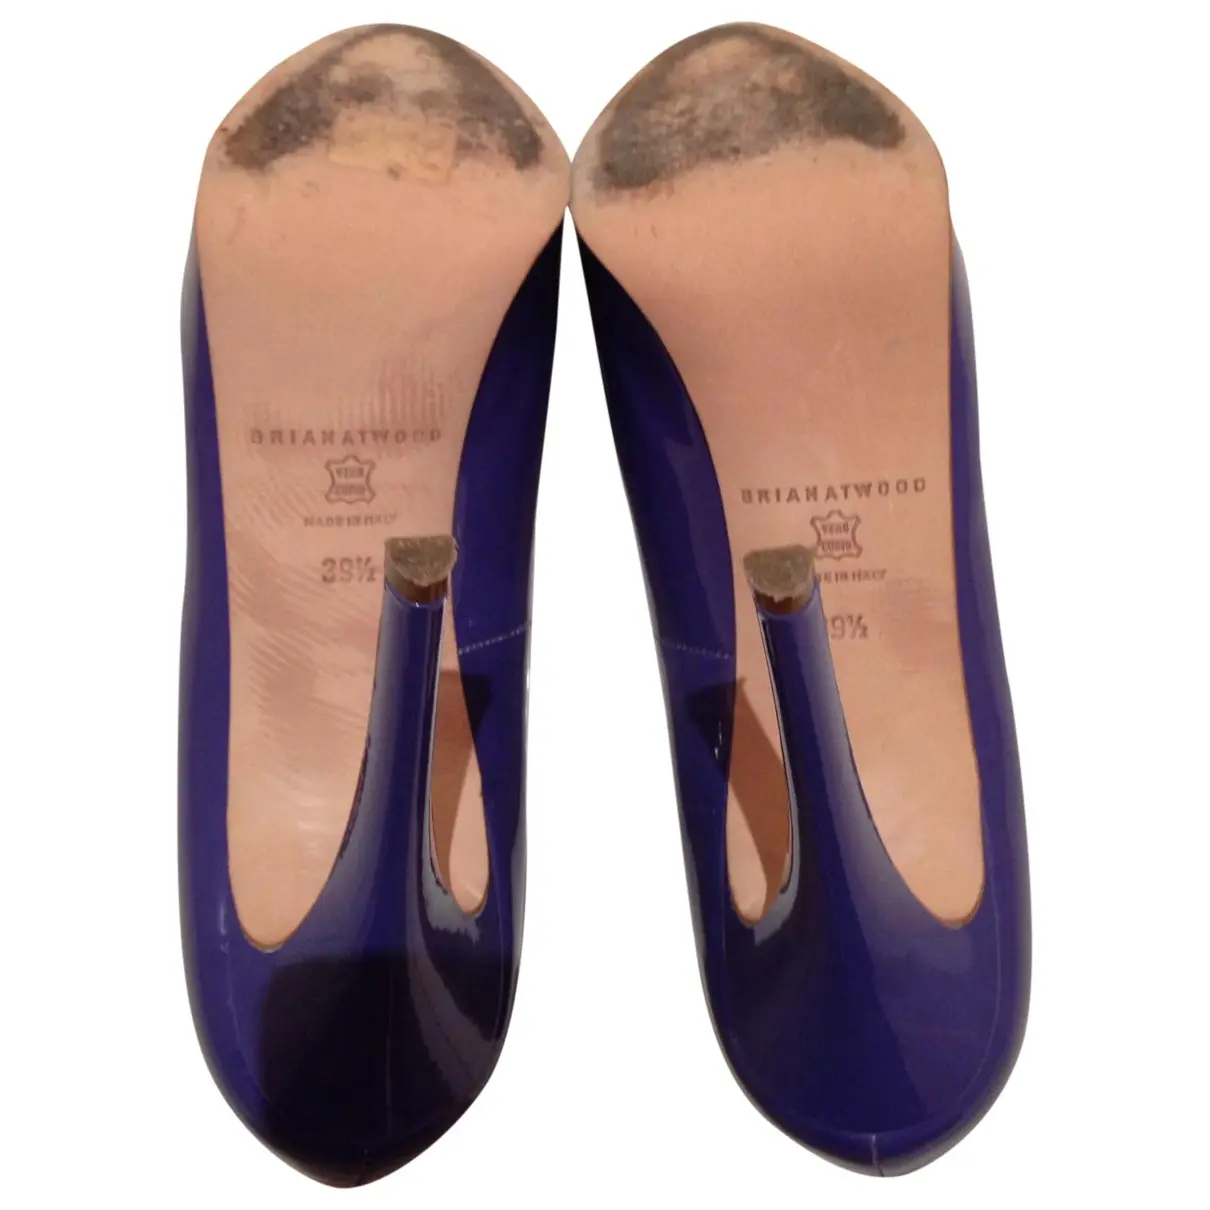 Buy Brian Atwood Purple Patent leather Heels online